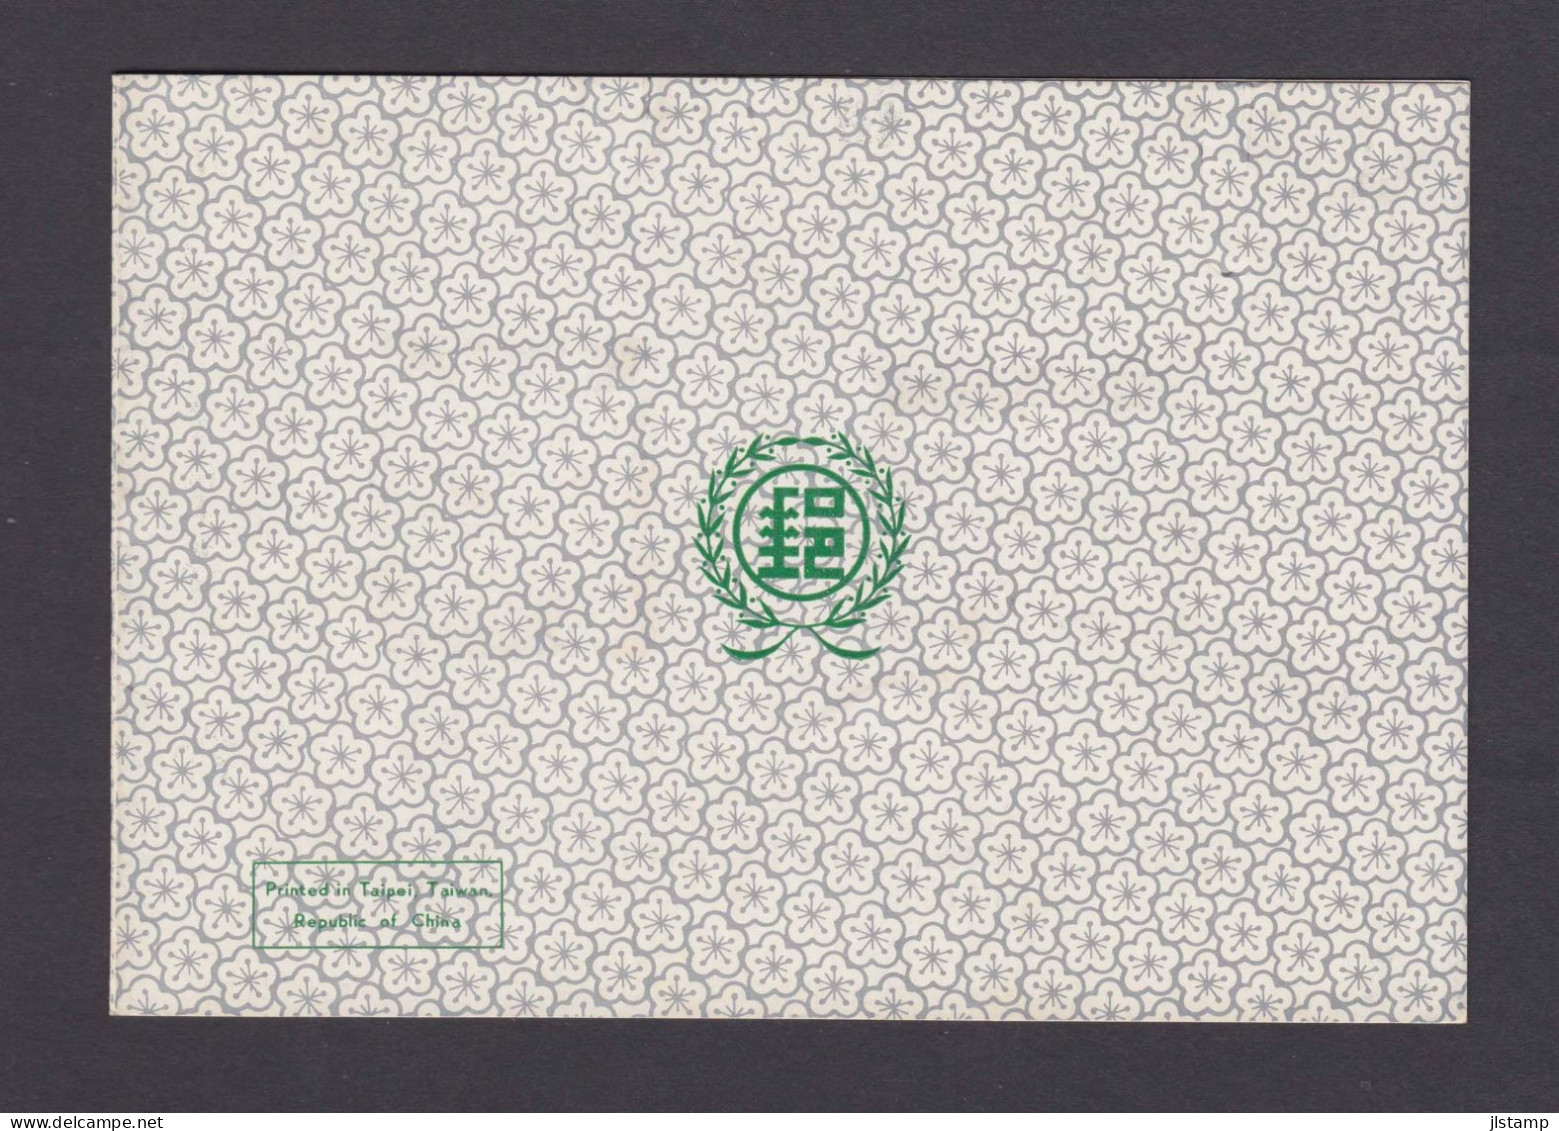 China Taiwan 1961 50 Anniv. Of Republic Of China,Folder With Stamps And Sheet,Scott# 1321-1322a, VF - Covers & Documents